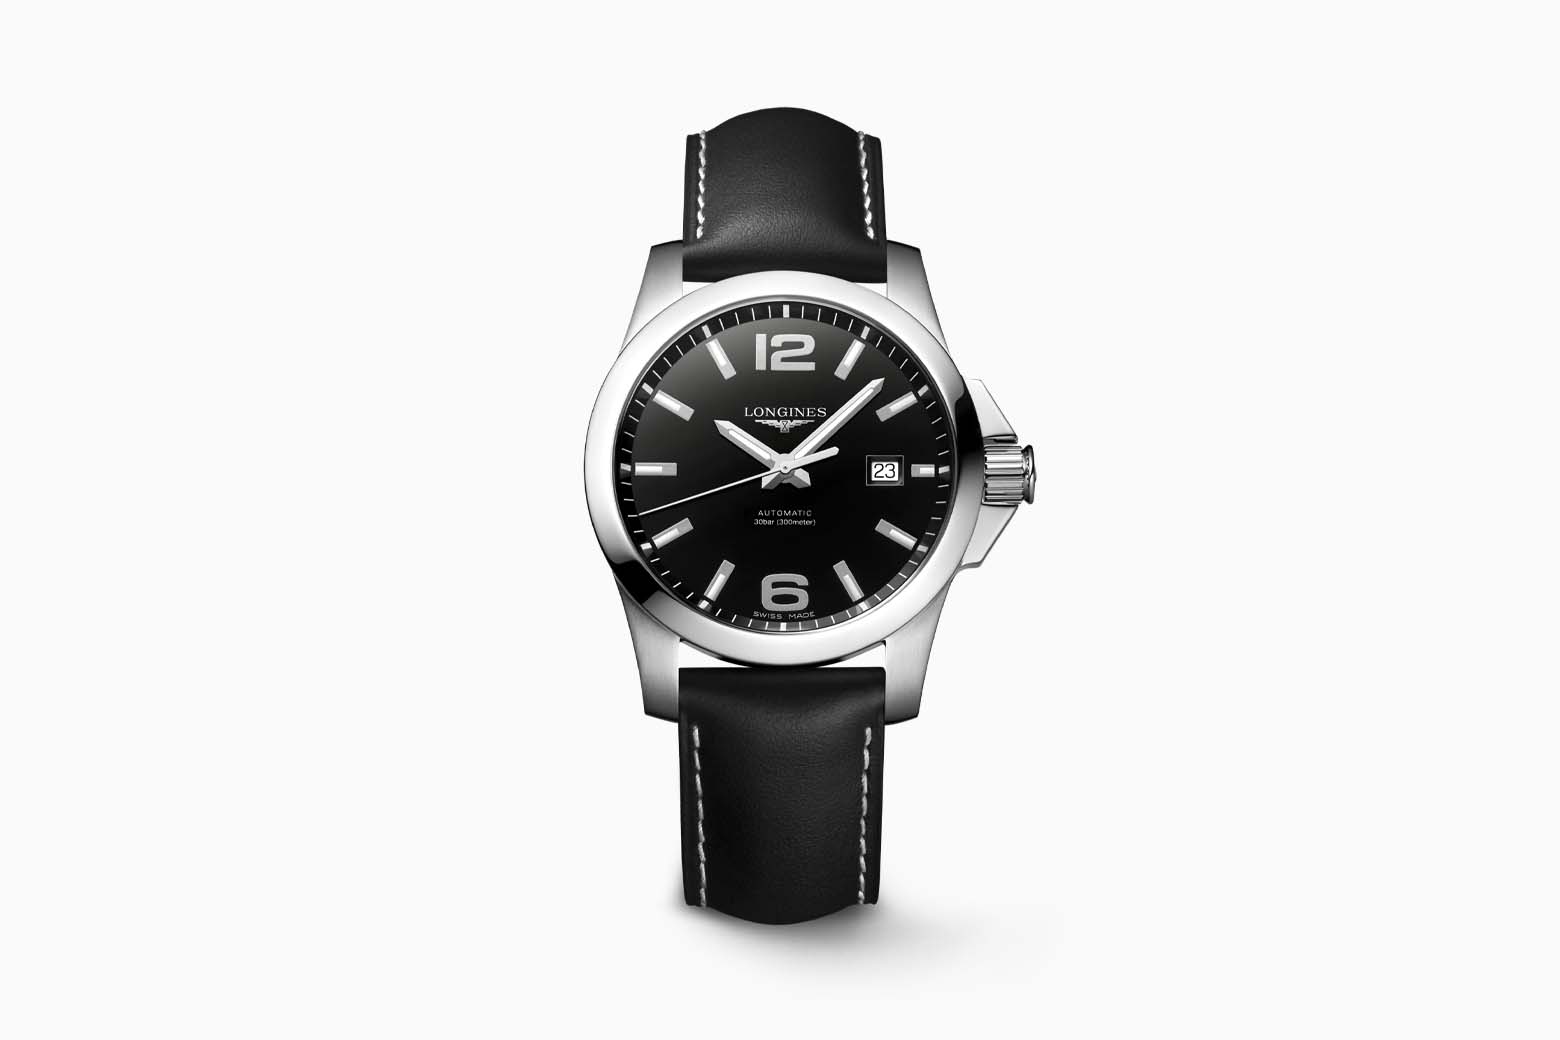 Longines Watches: All Models & Prices (Buying Guide)